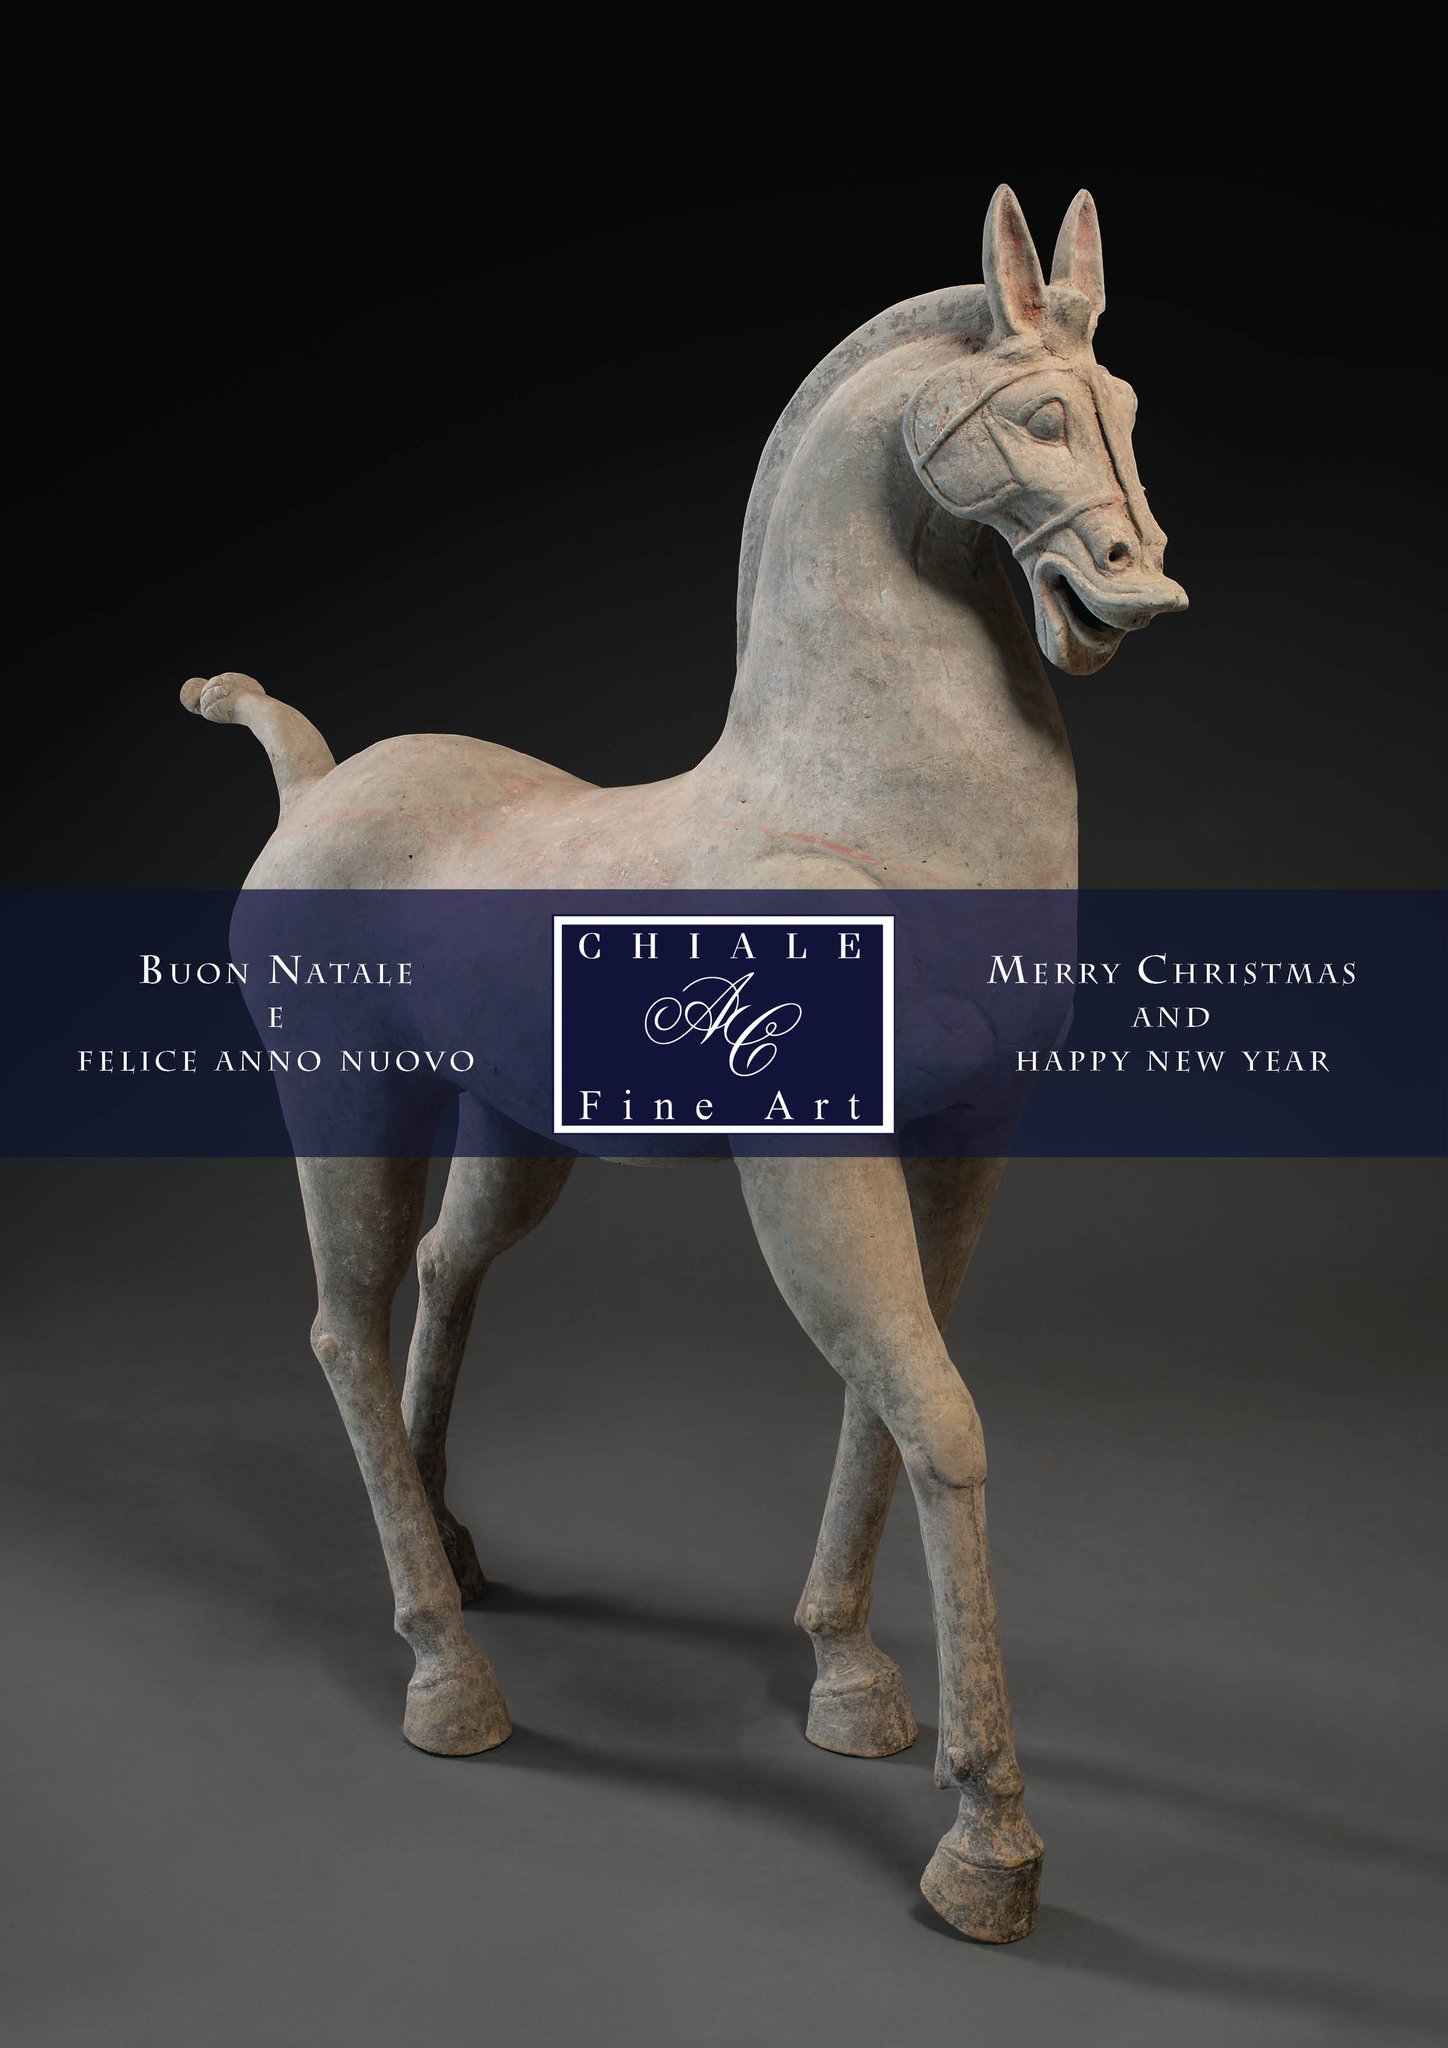 Buon Natale Horse.Chiale Fine Art On Twitter Merry Christmas And Happy New Year Happynewyear Art Antiques Photo Chinese Potteryhorse Horse Horsejump Https T Co O2naihckpr